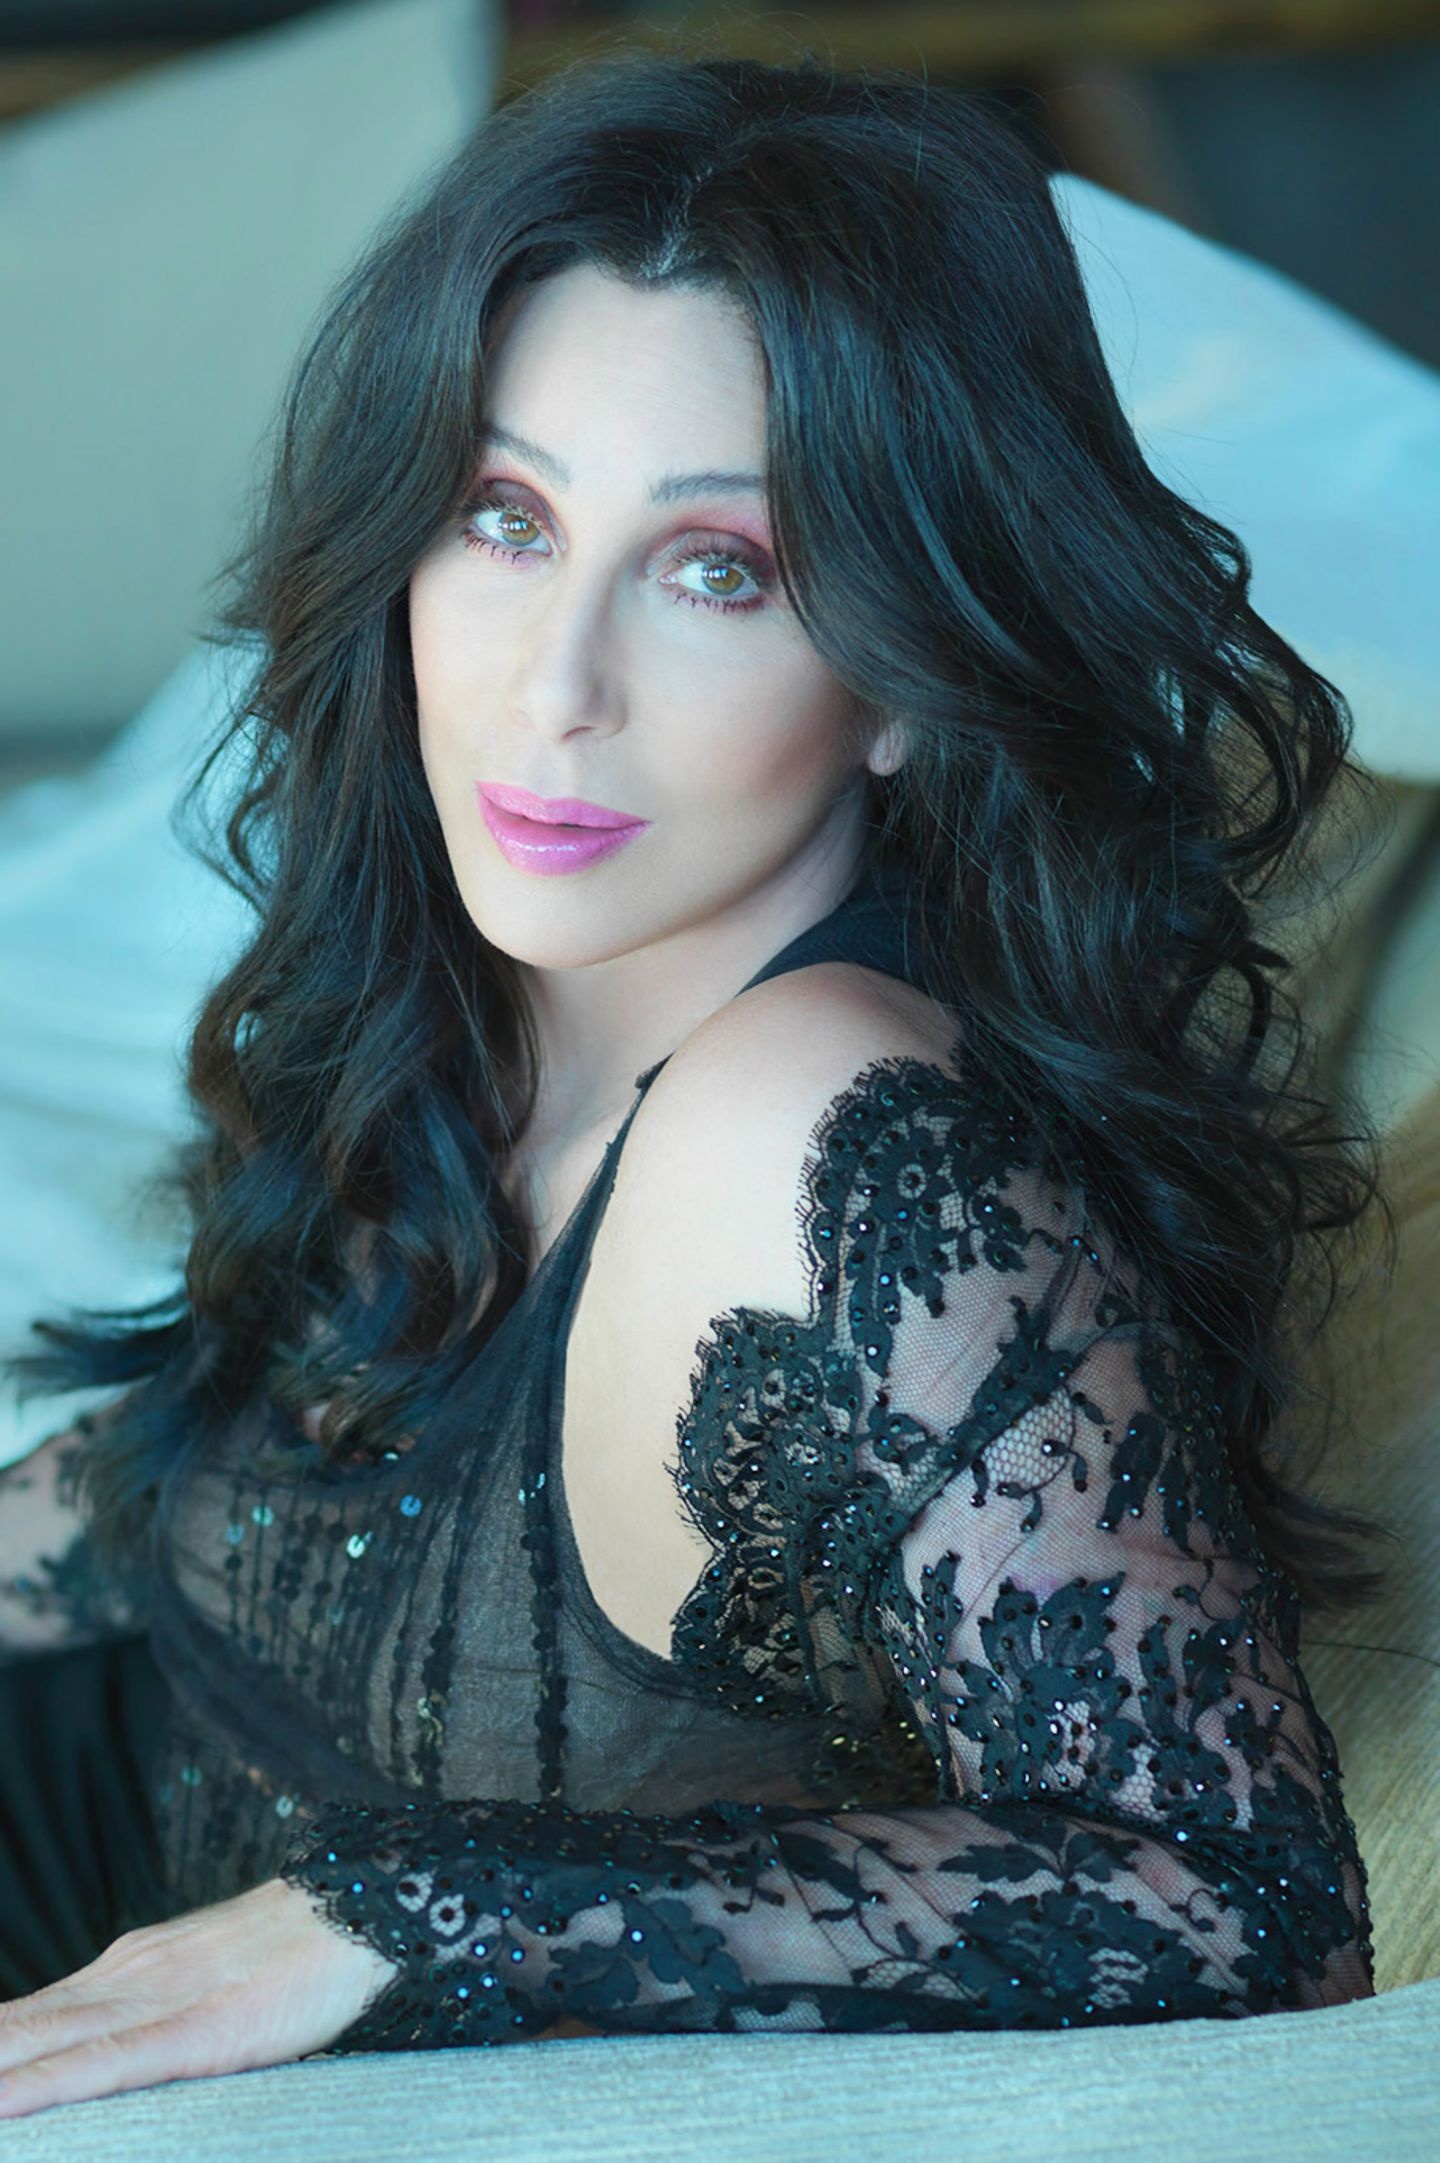 Cher's legacy, Cher's career, Cher's music, Cher's iconic image, 1440x2170 HD Phone